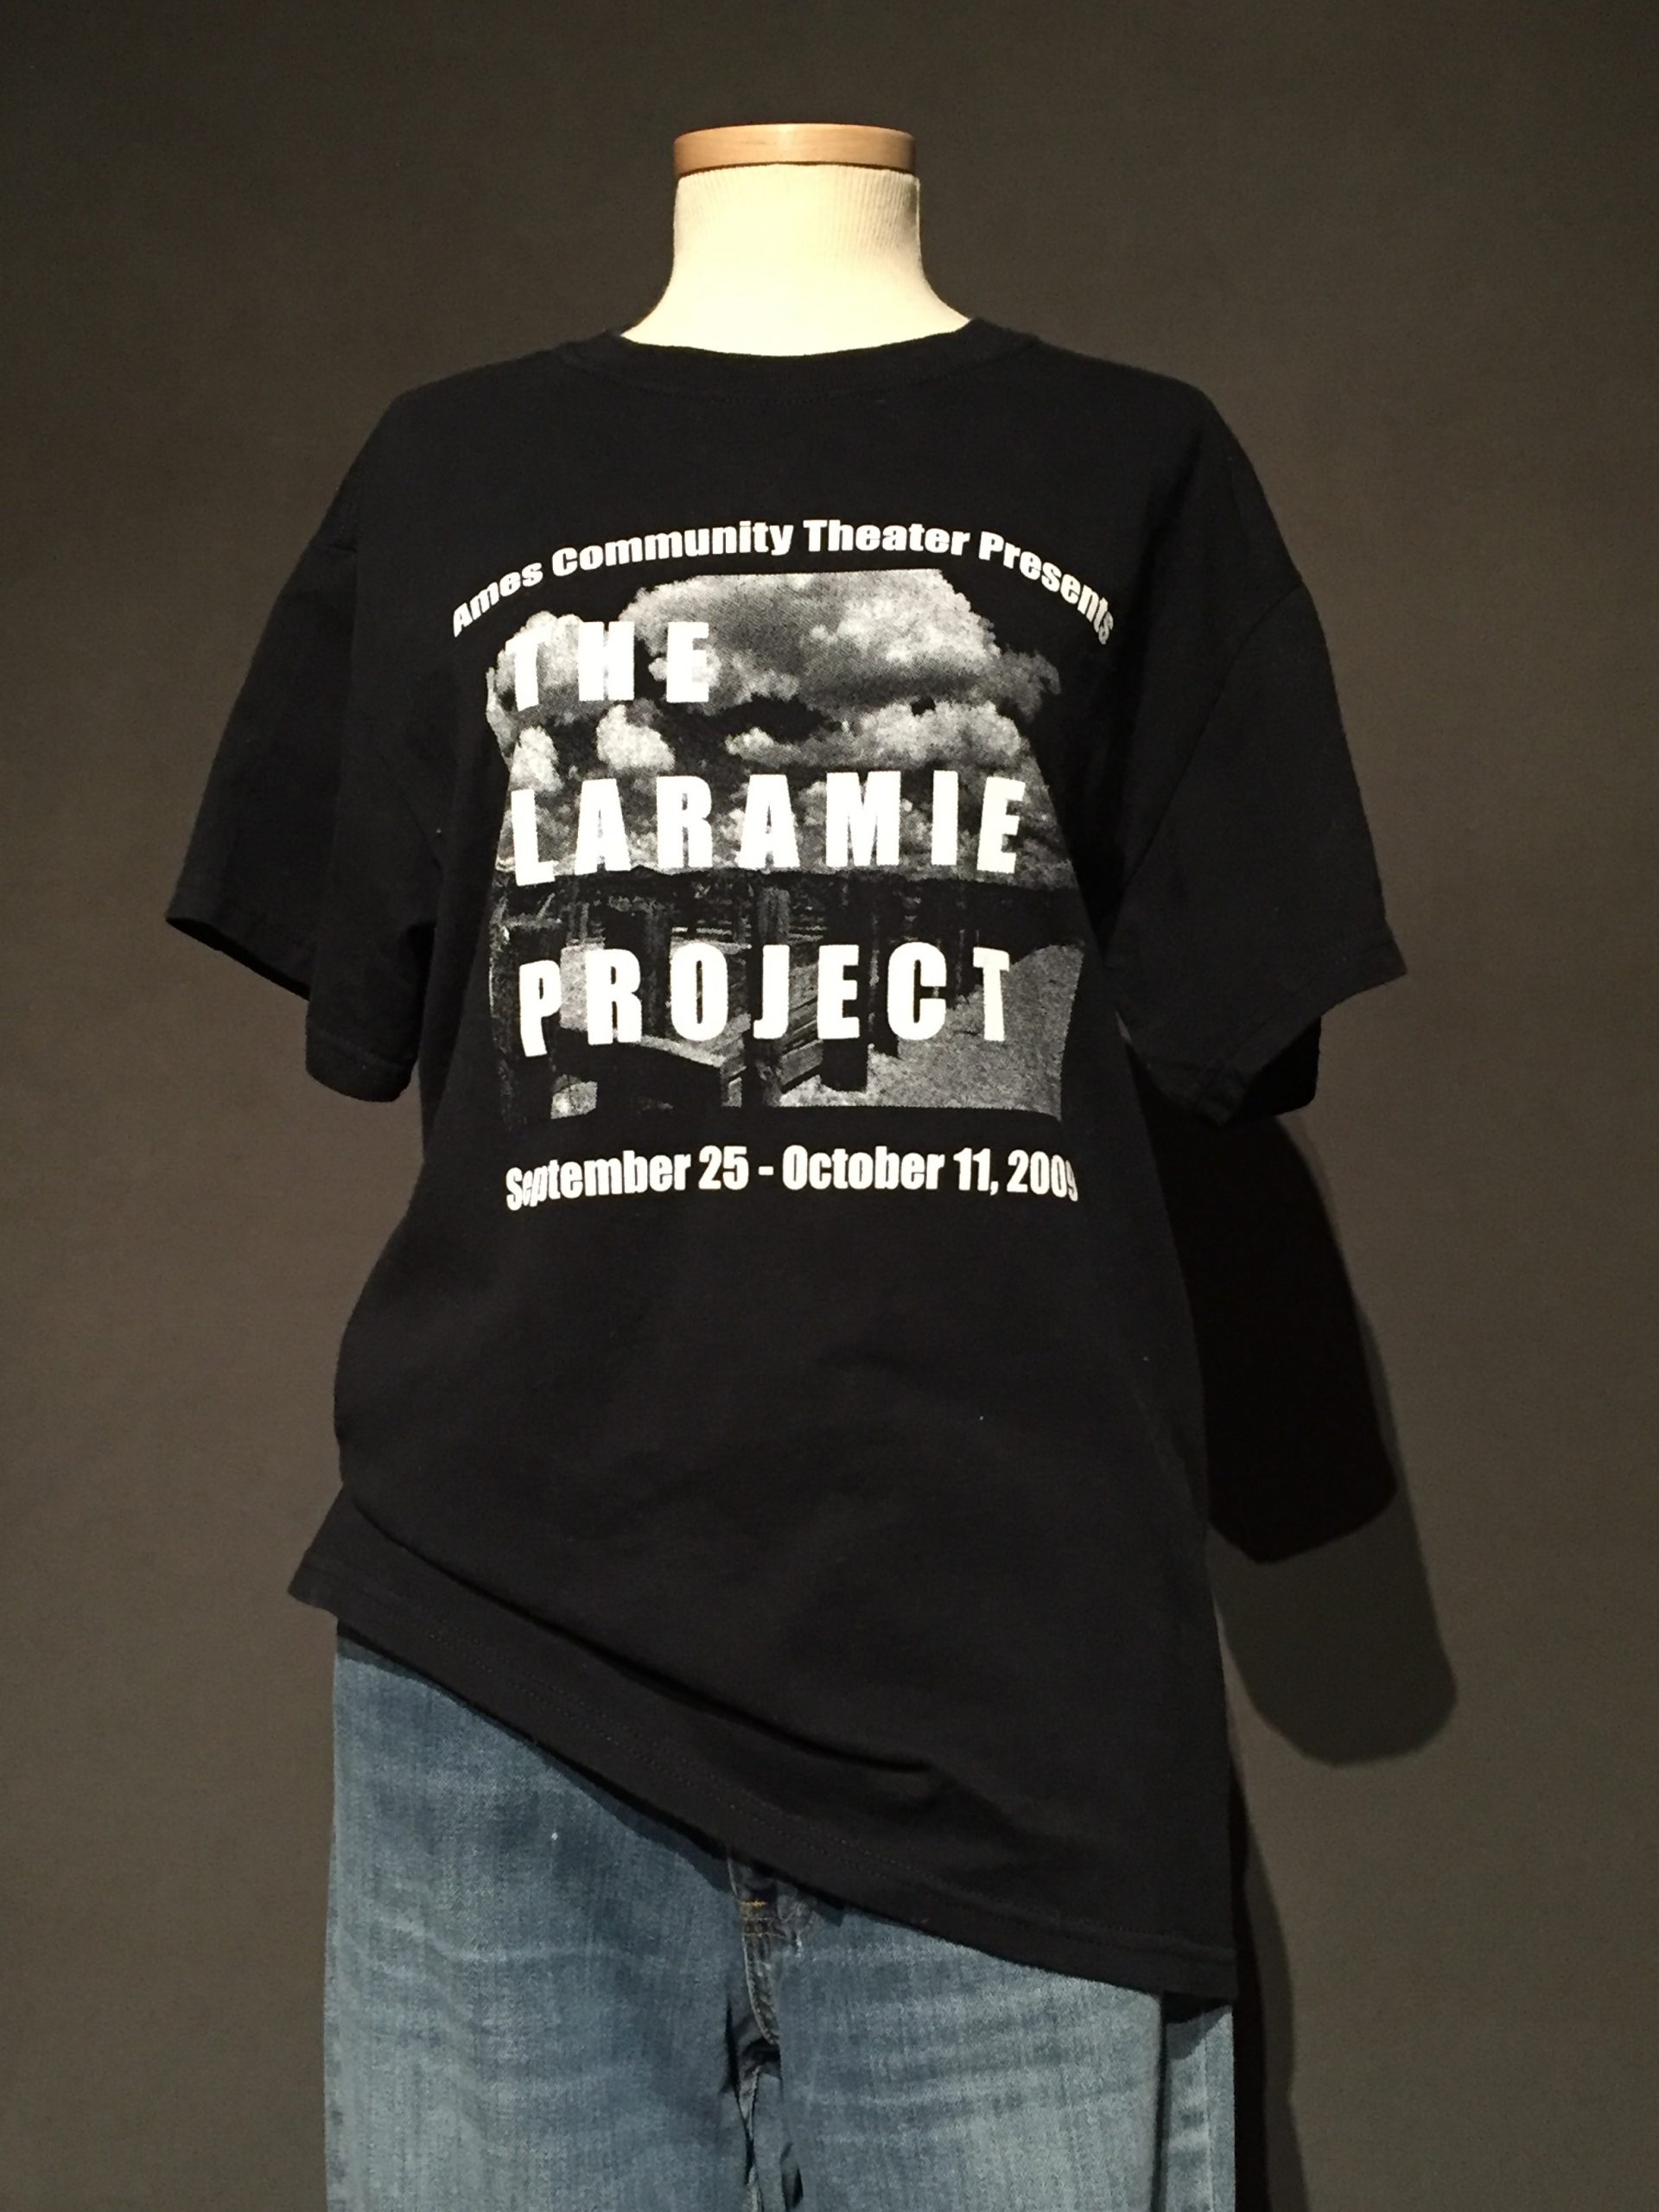 Black t-shirt with white text reading: "Ames Community Theater Presents: The Laramie Project, September 25-October 11, 2019"